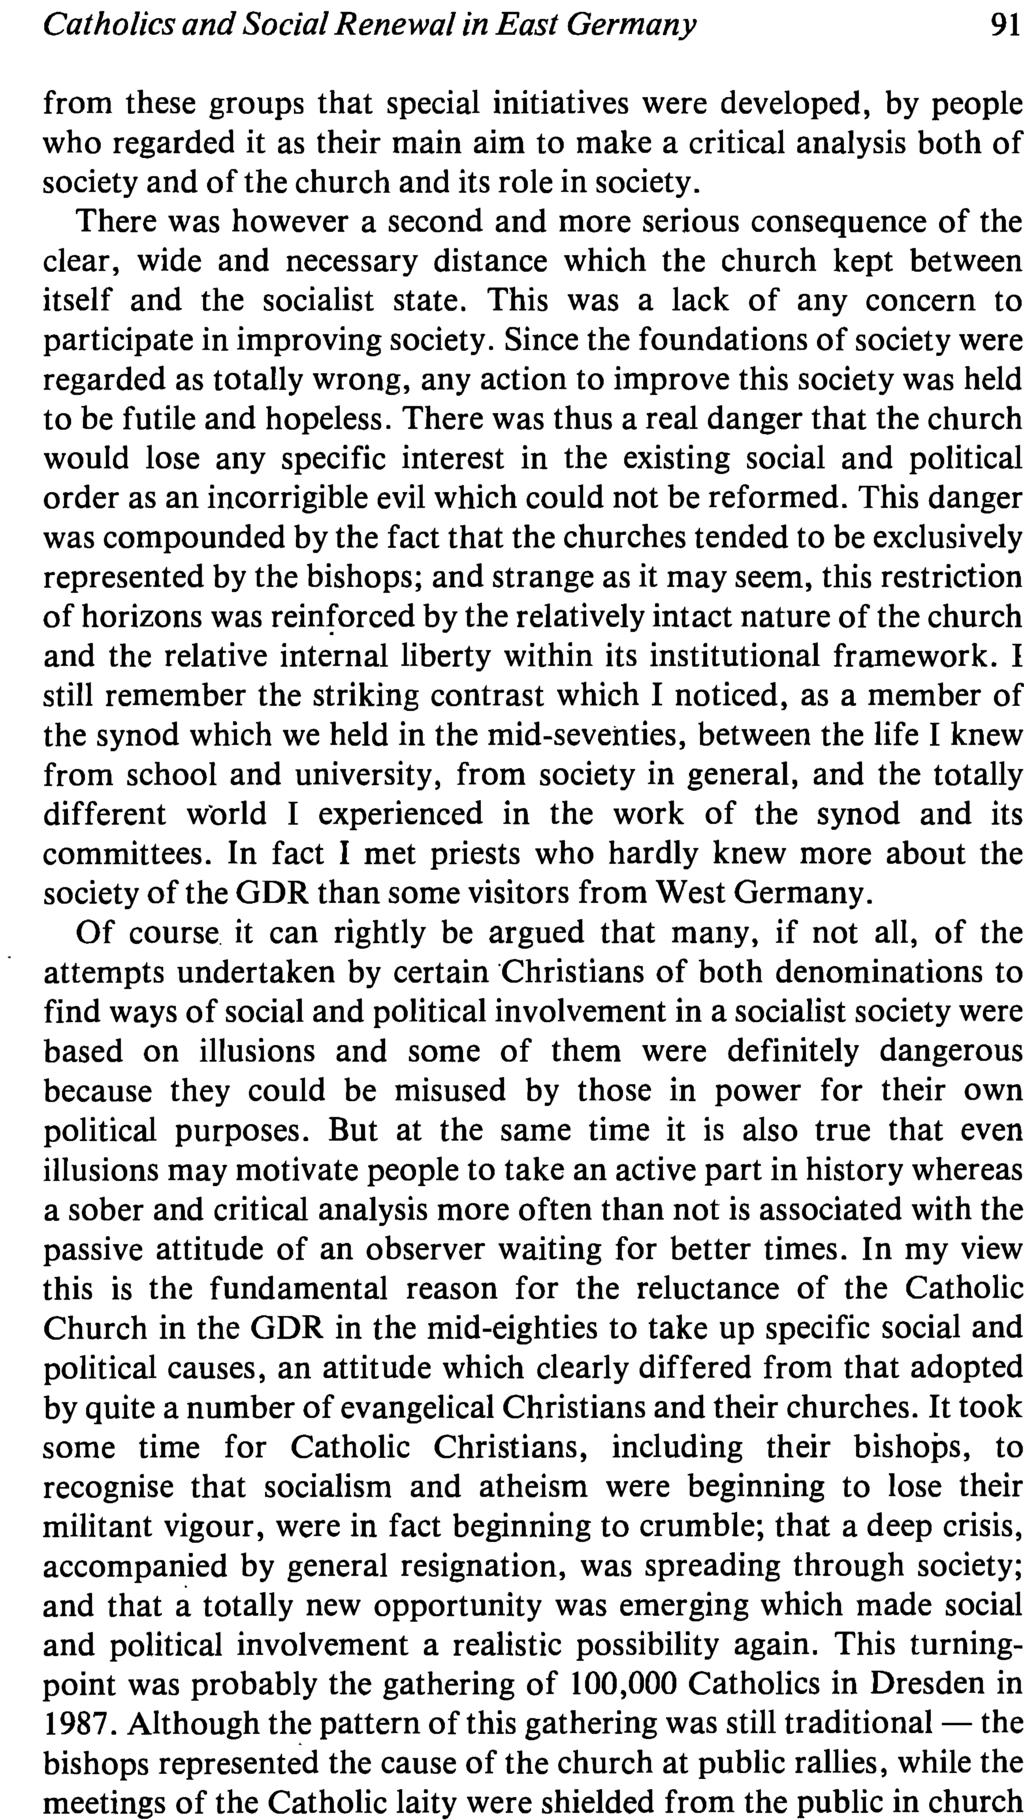 Catholics and Social Renewal in East Germany 91 from these groups that special initiatives were developed, by people who regarded it as their main aim to make a critical analysis both of society and